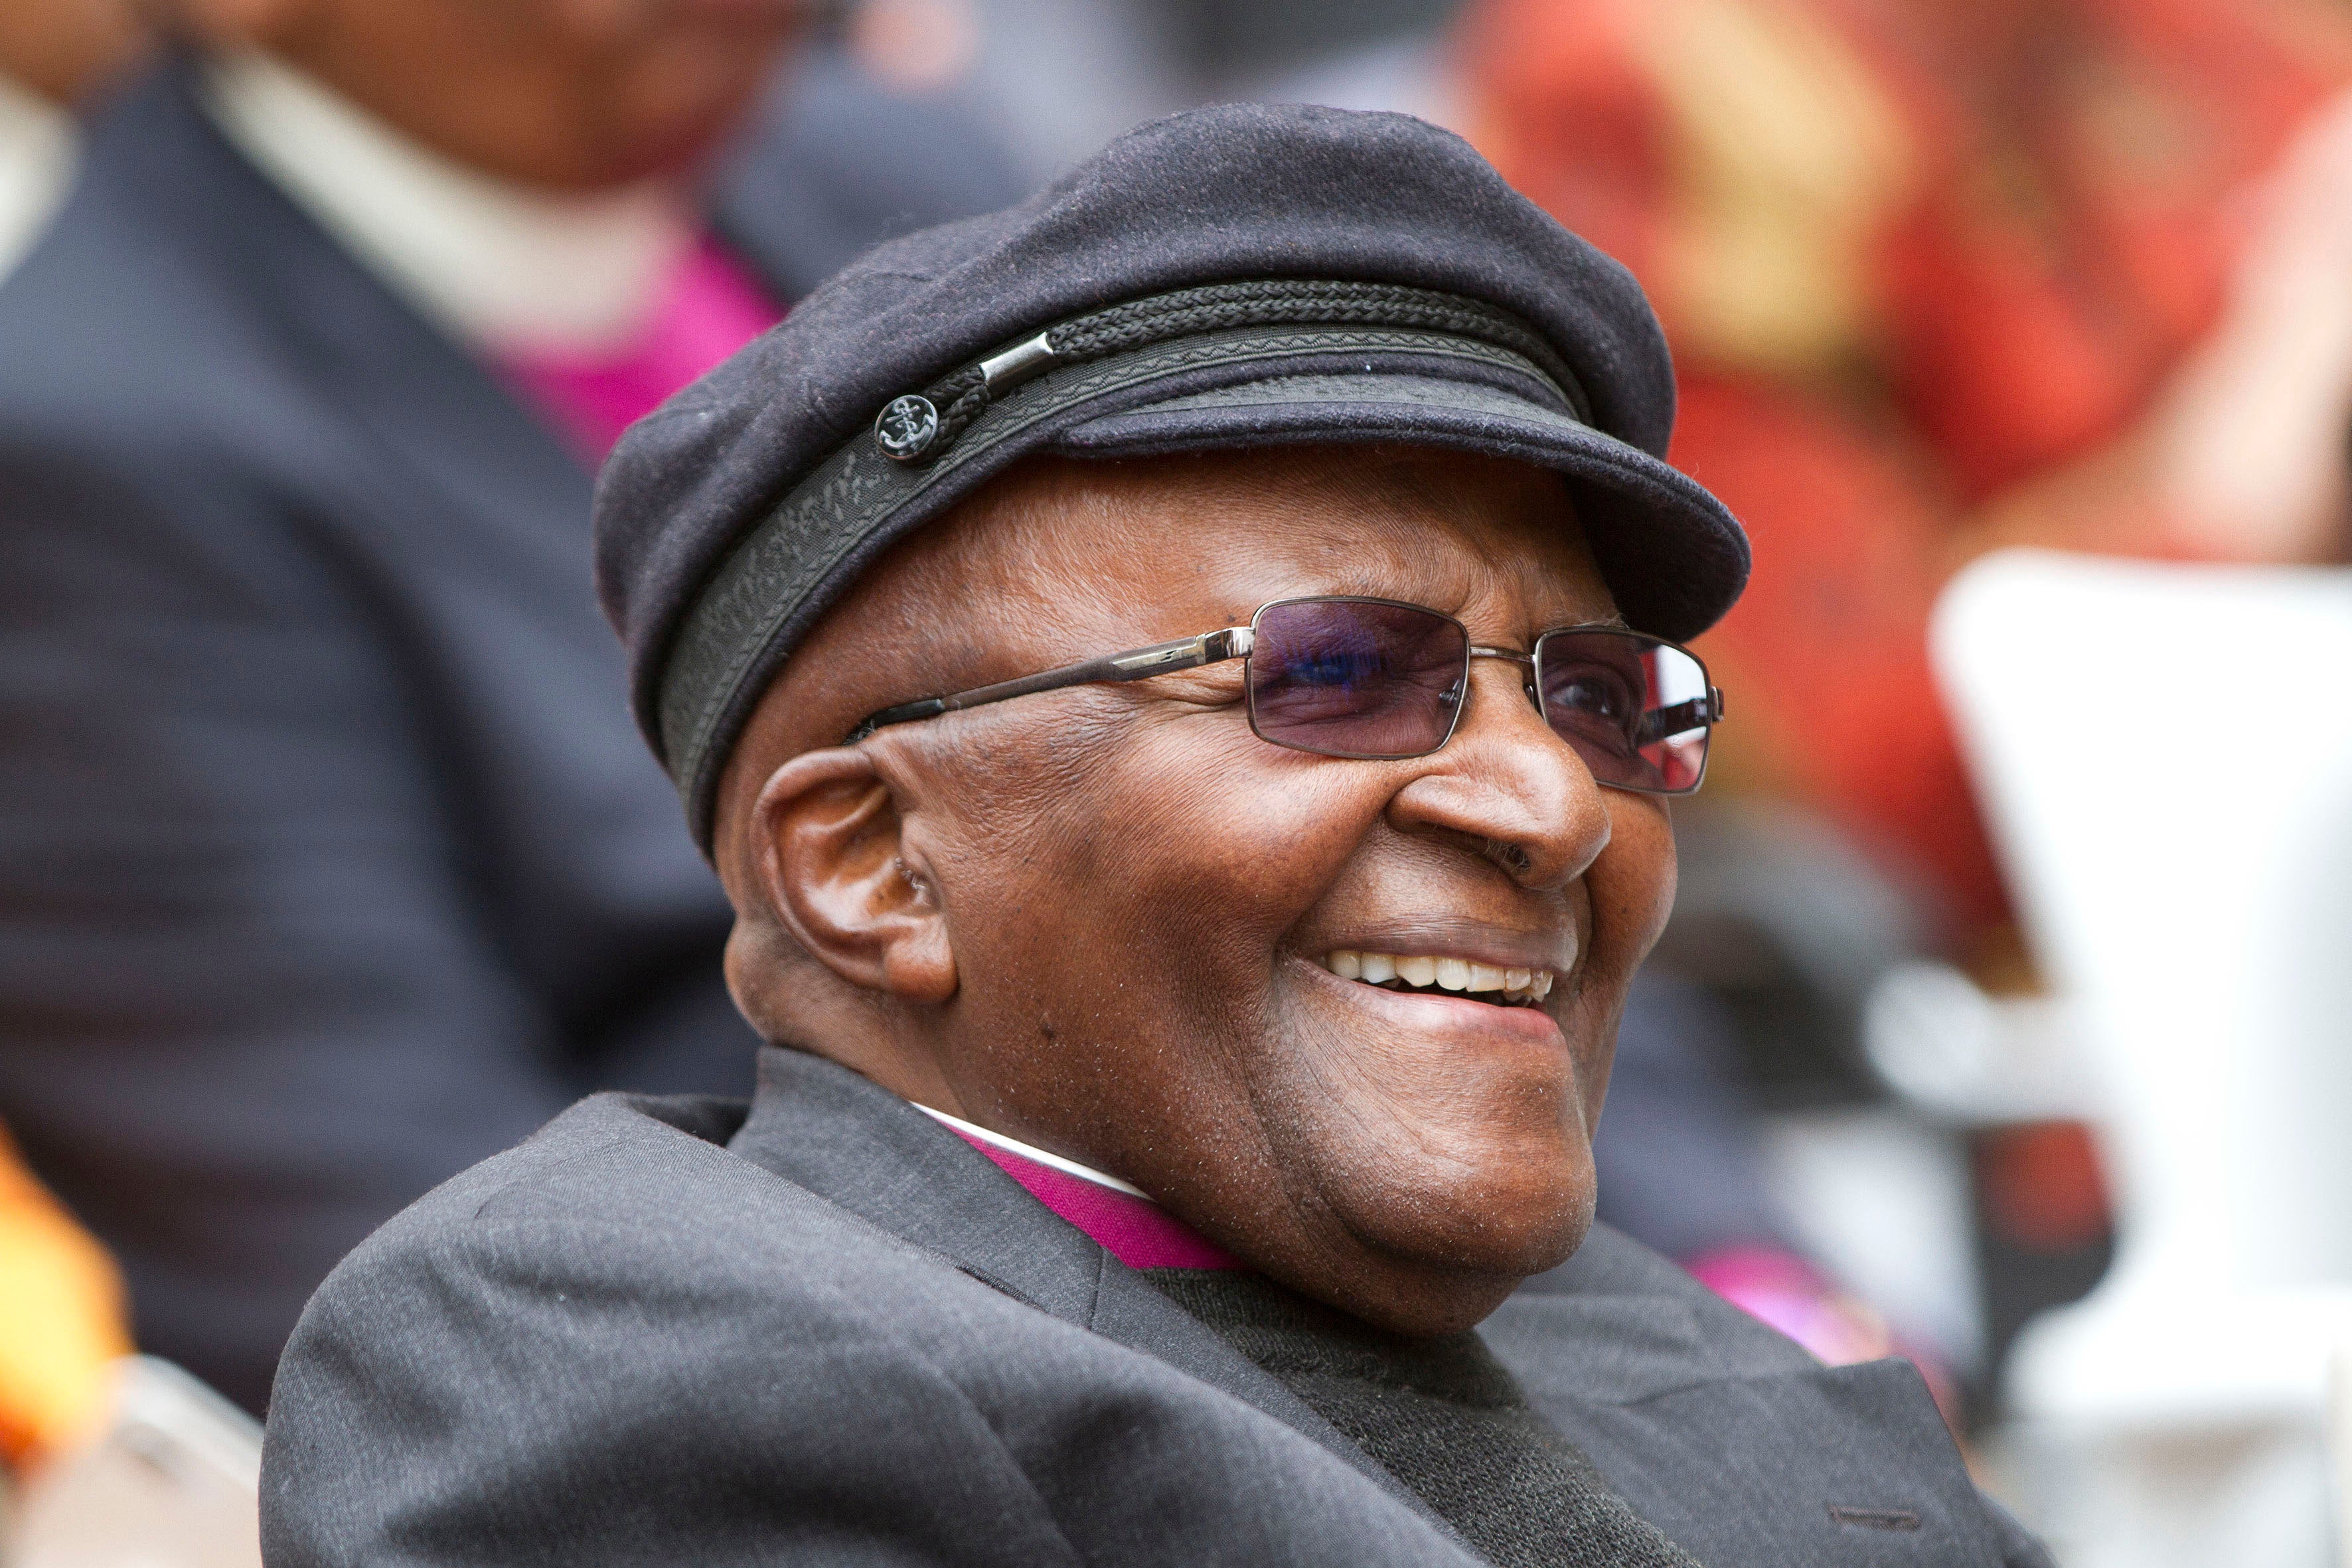 File photo: Anglican Archbishop Emeritus Desmond Tutu smiles as he celebrates his 86th birthday in Cape Town South Africa, 7 October 2017